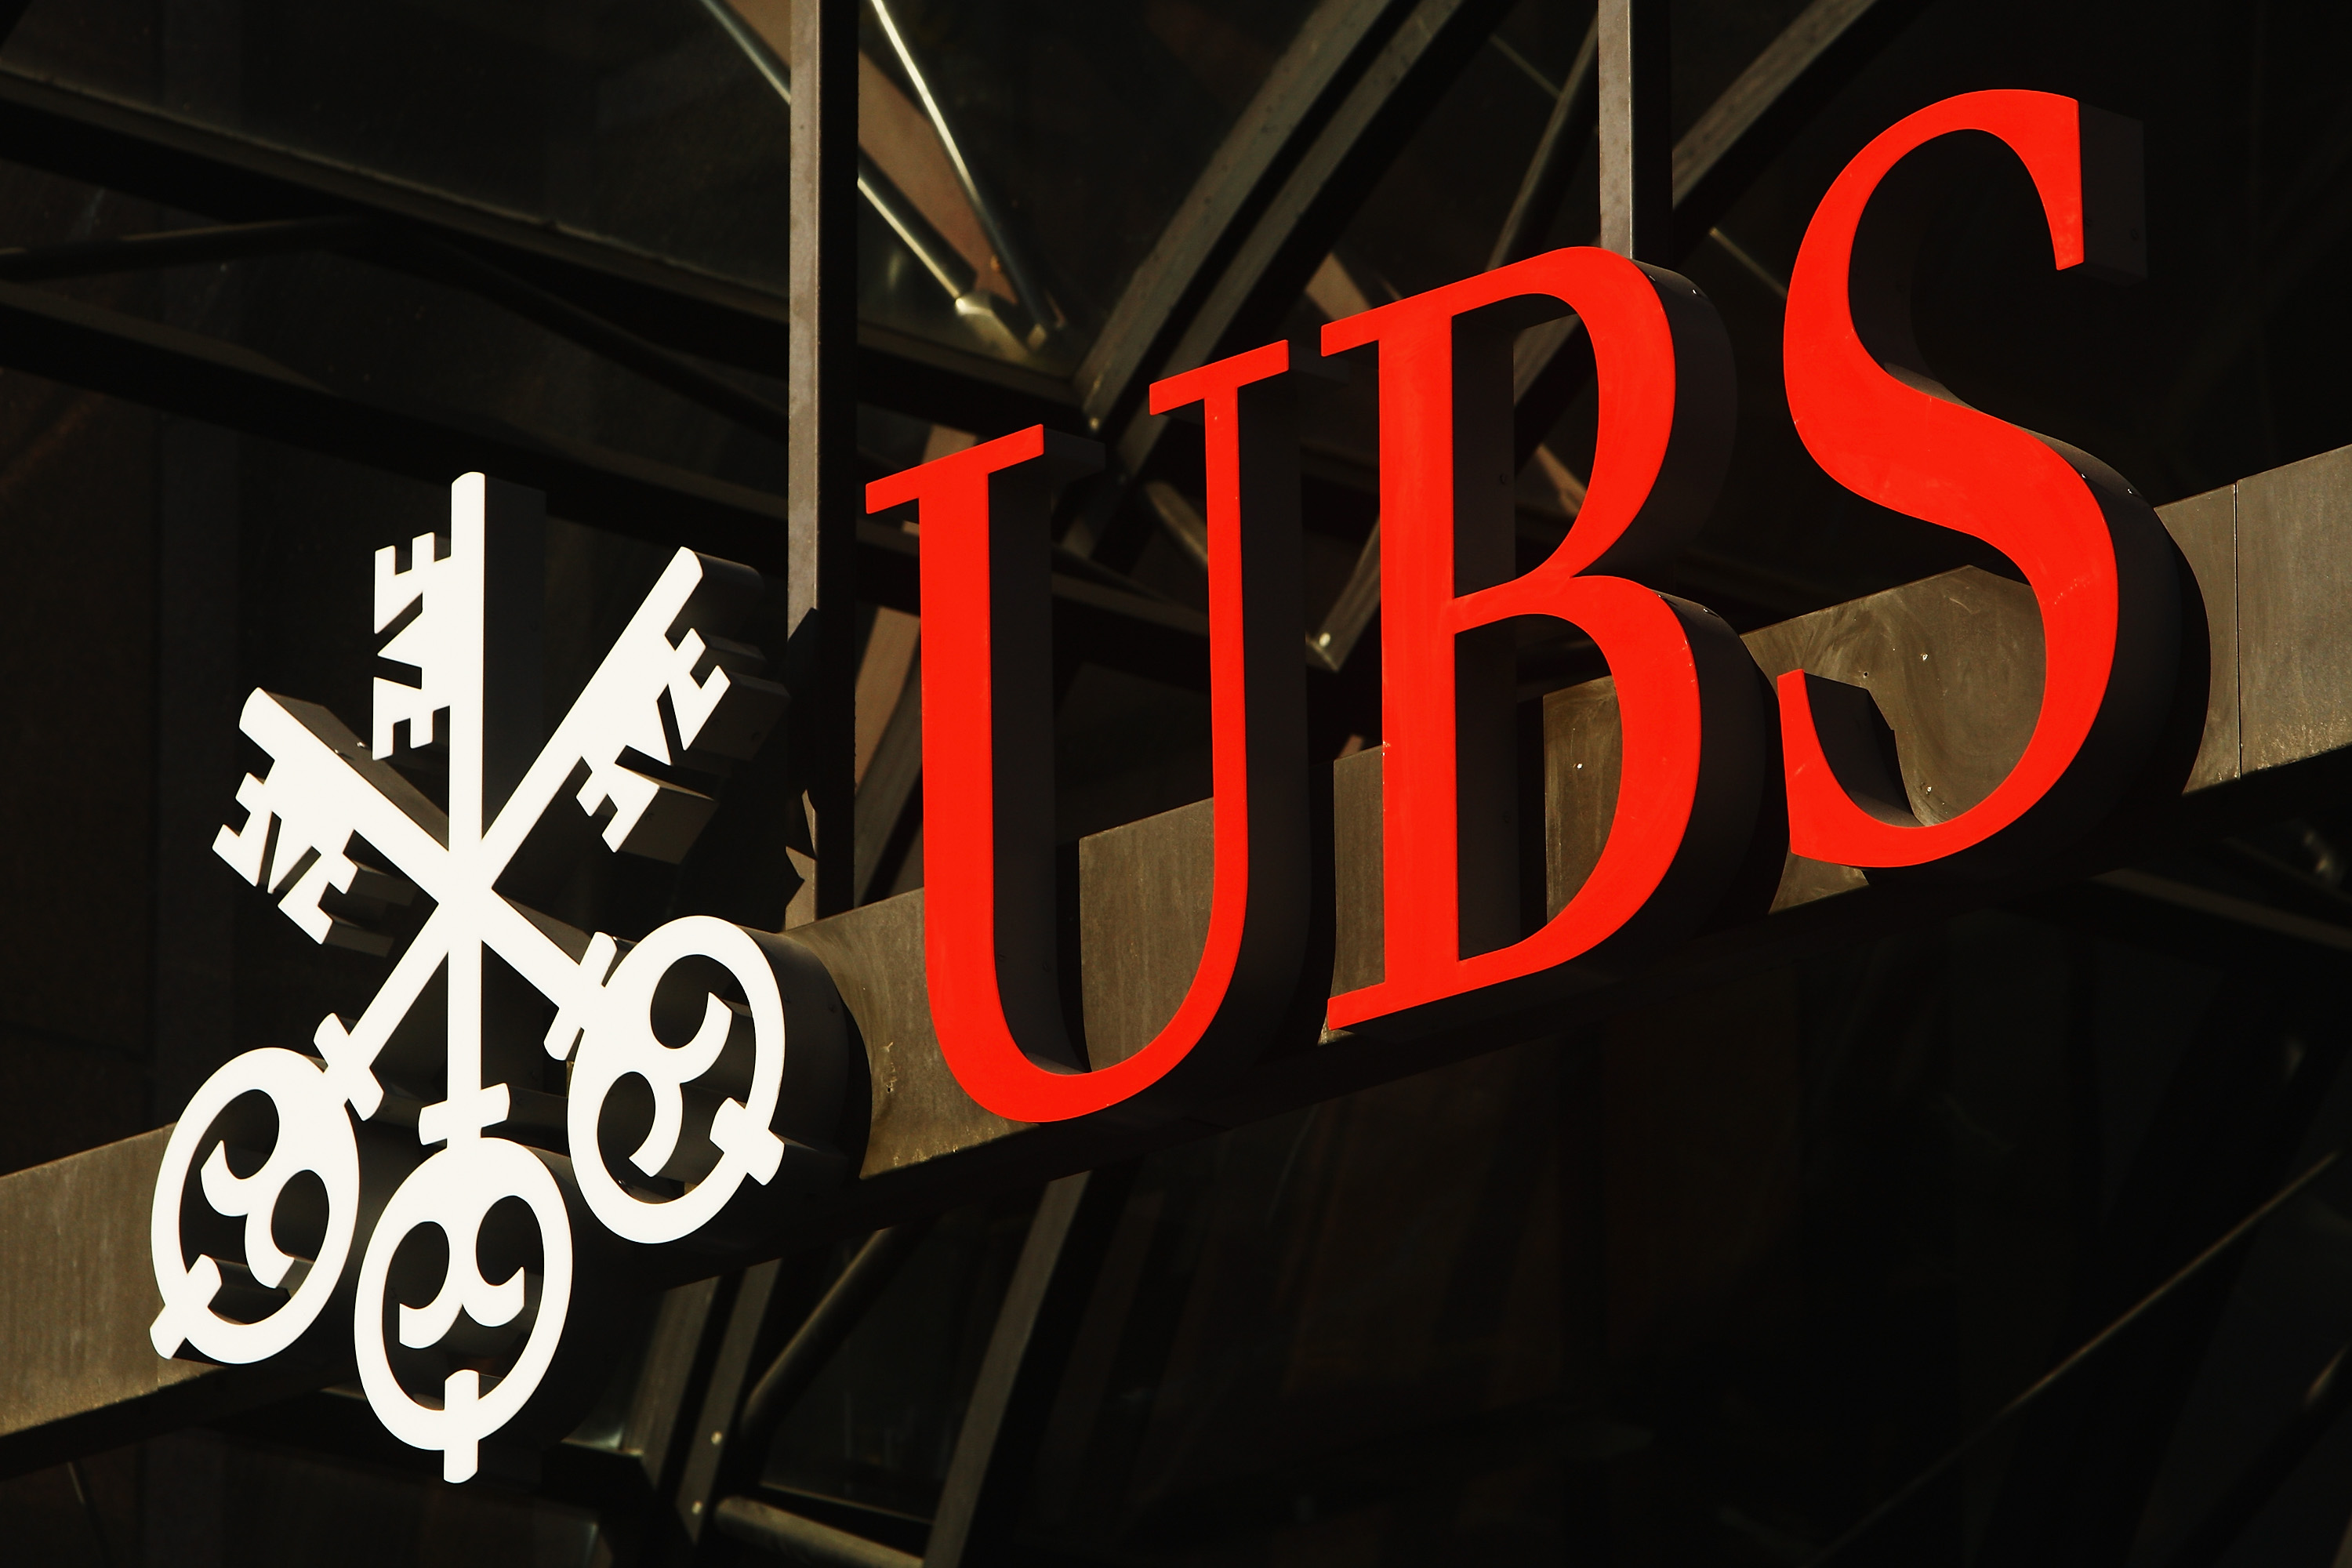 UBS will plead guilty to market manipulation charges, pay $545 million